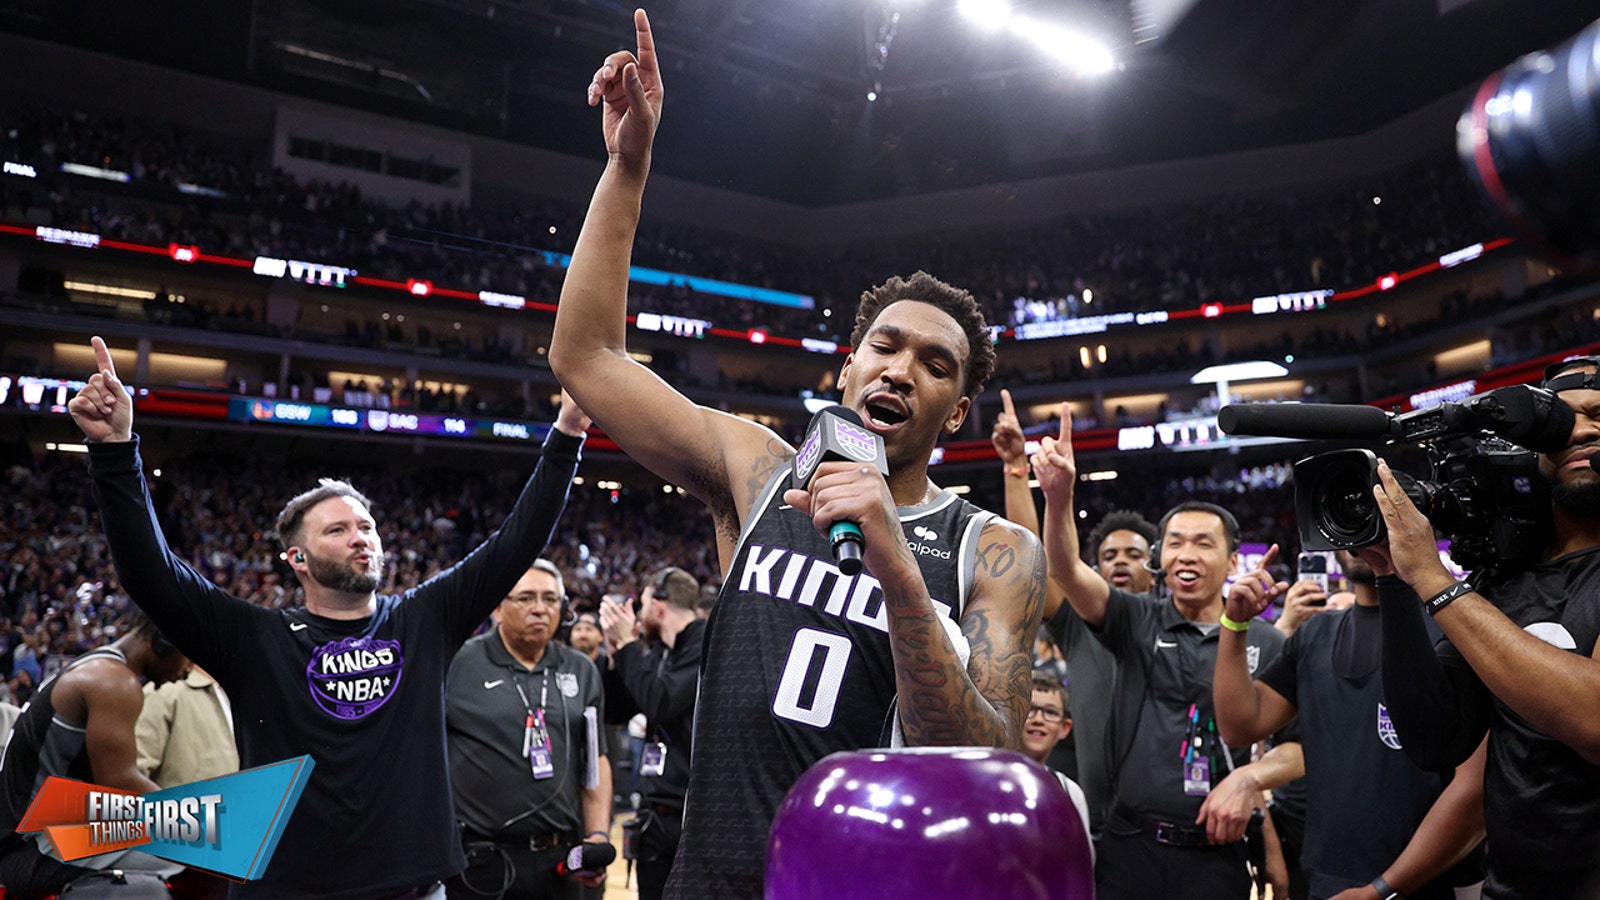 Kings 'Light The Beam' after Game 2 win vs. Warriors